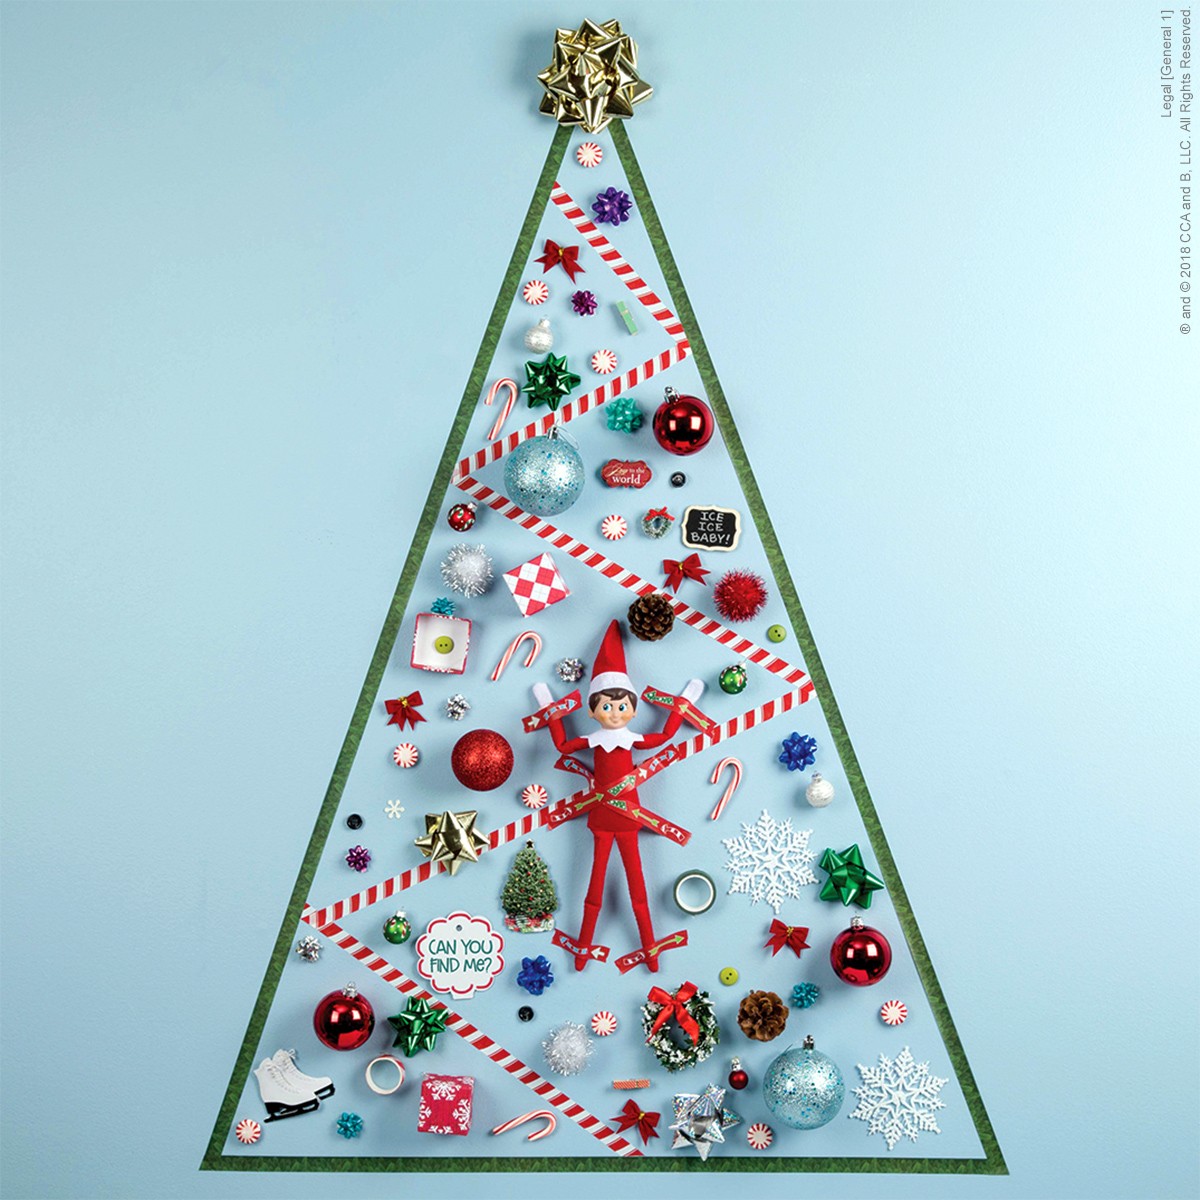 Christmas Tree Collage | The Elf on the Shelf